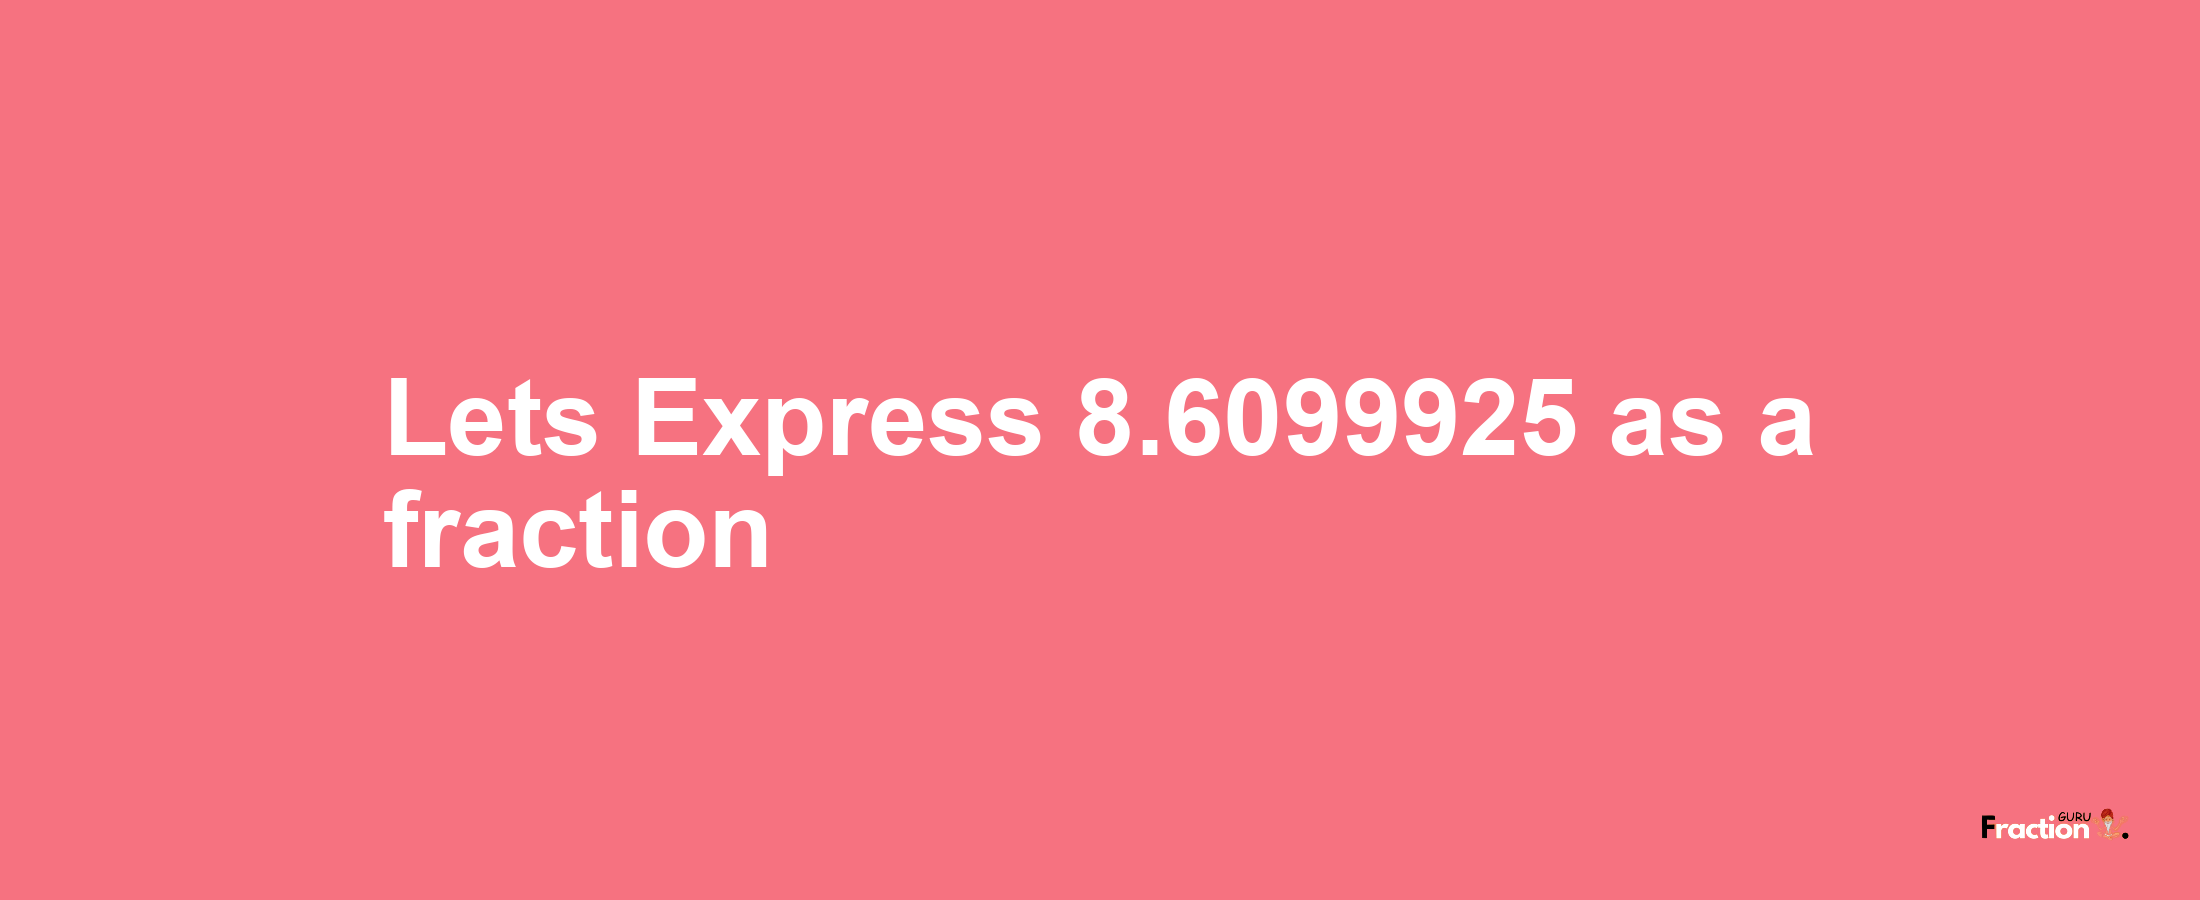 Lets Express 8.6099925 as afraction